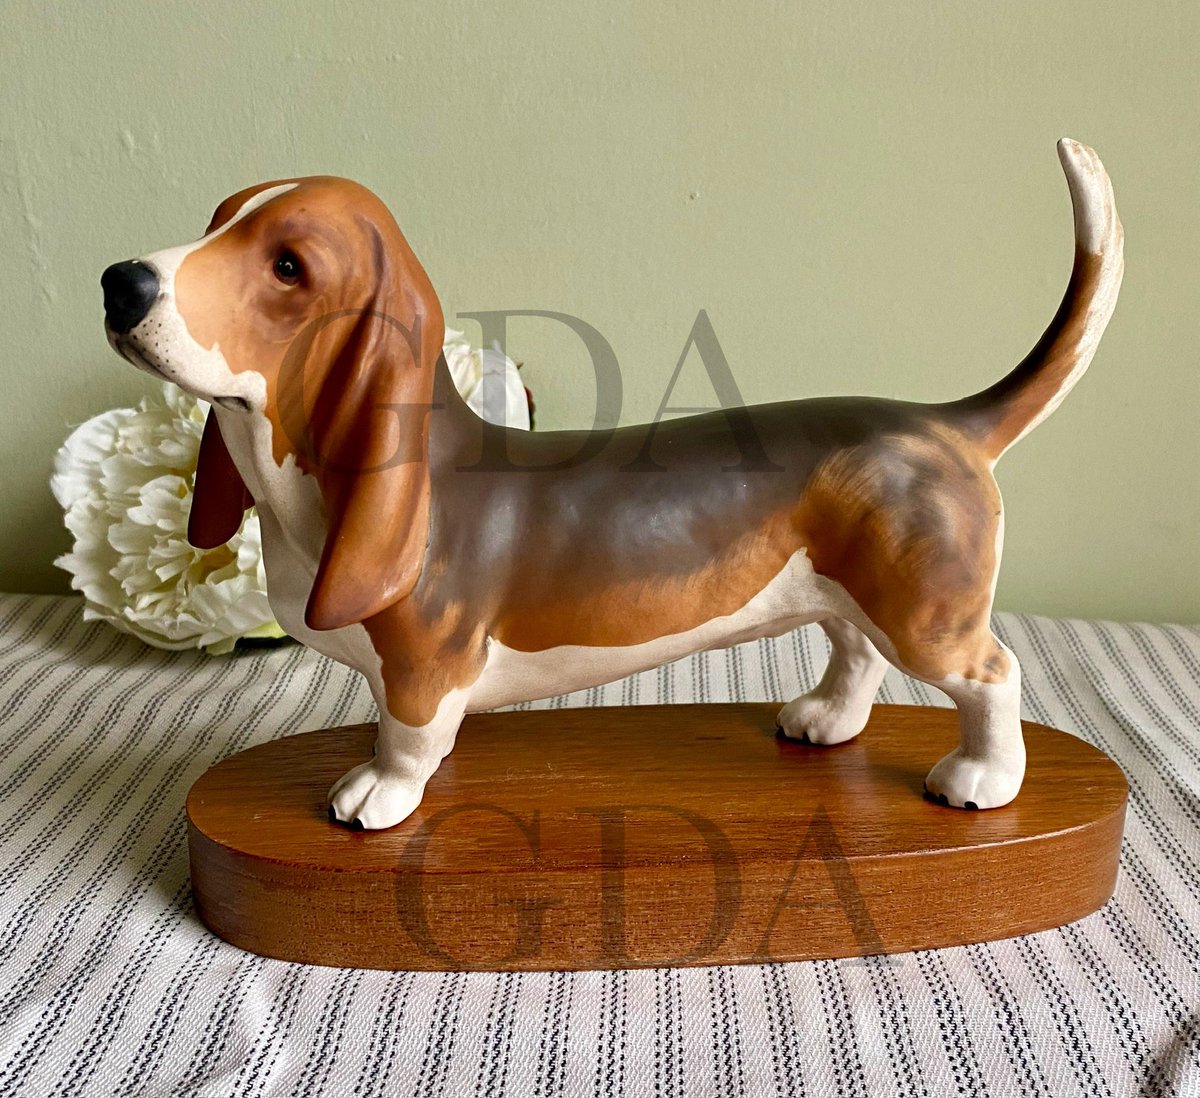 New item 🐶
Beswick Basset Hound on wooden stand. 
See it and more at,
Dieudonneart.com/antiques 

#dogs #Beswick #collectables #vintage #ukgiftam #ukgifthour #smartsocial #shopindie #gifts